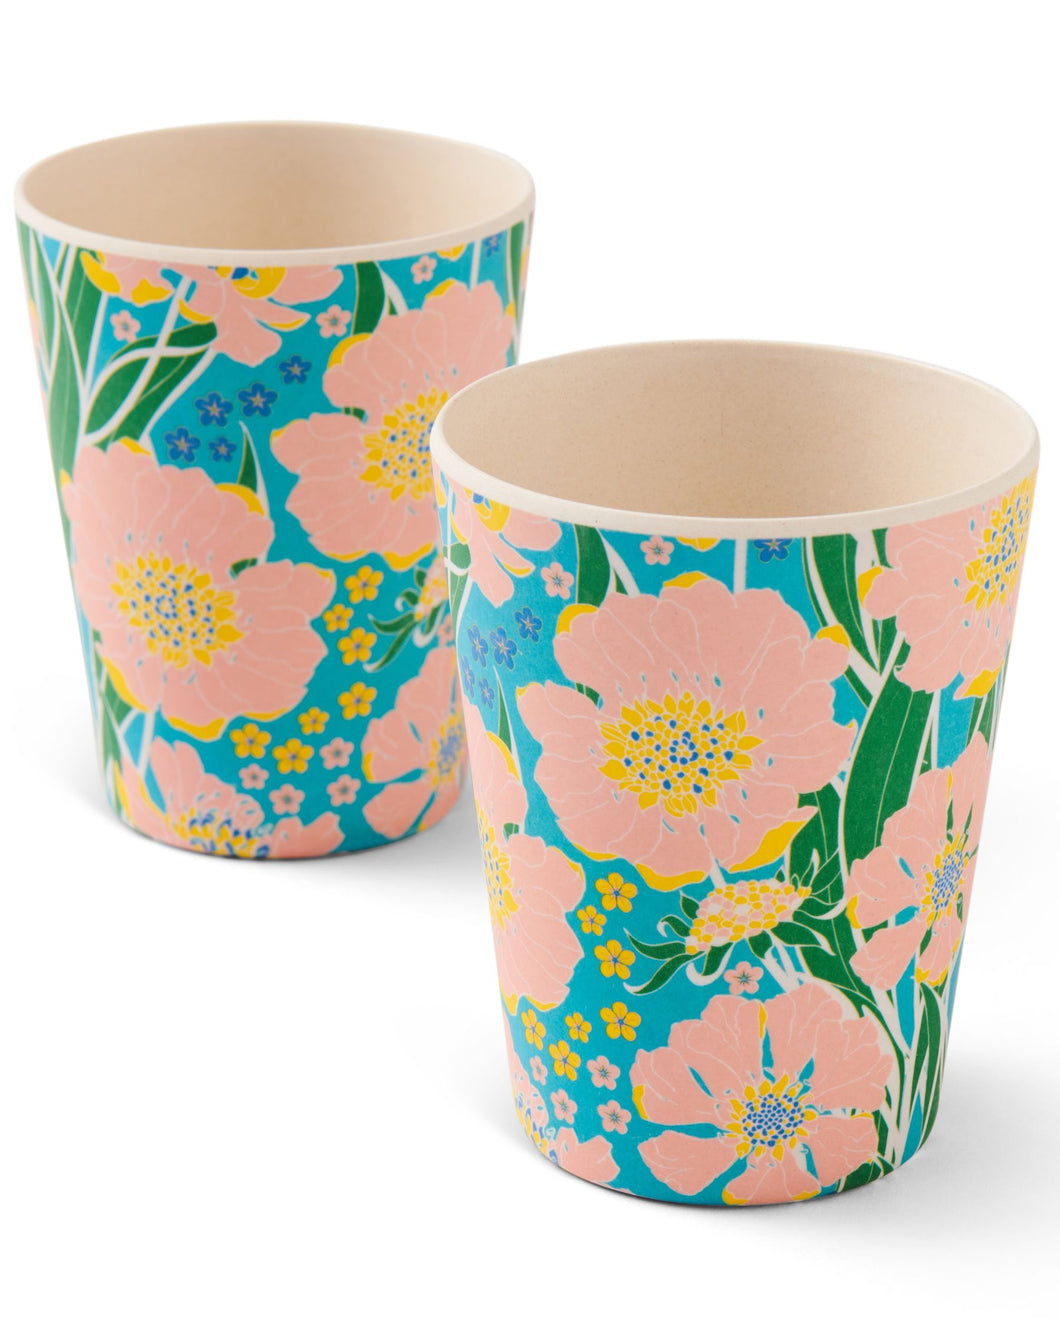 Tumbling Flowers Cup 2P Set One Size